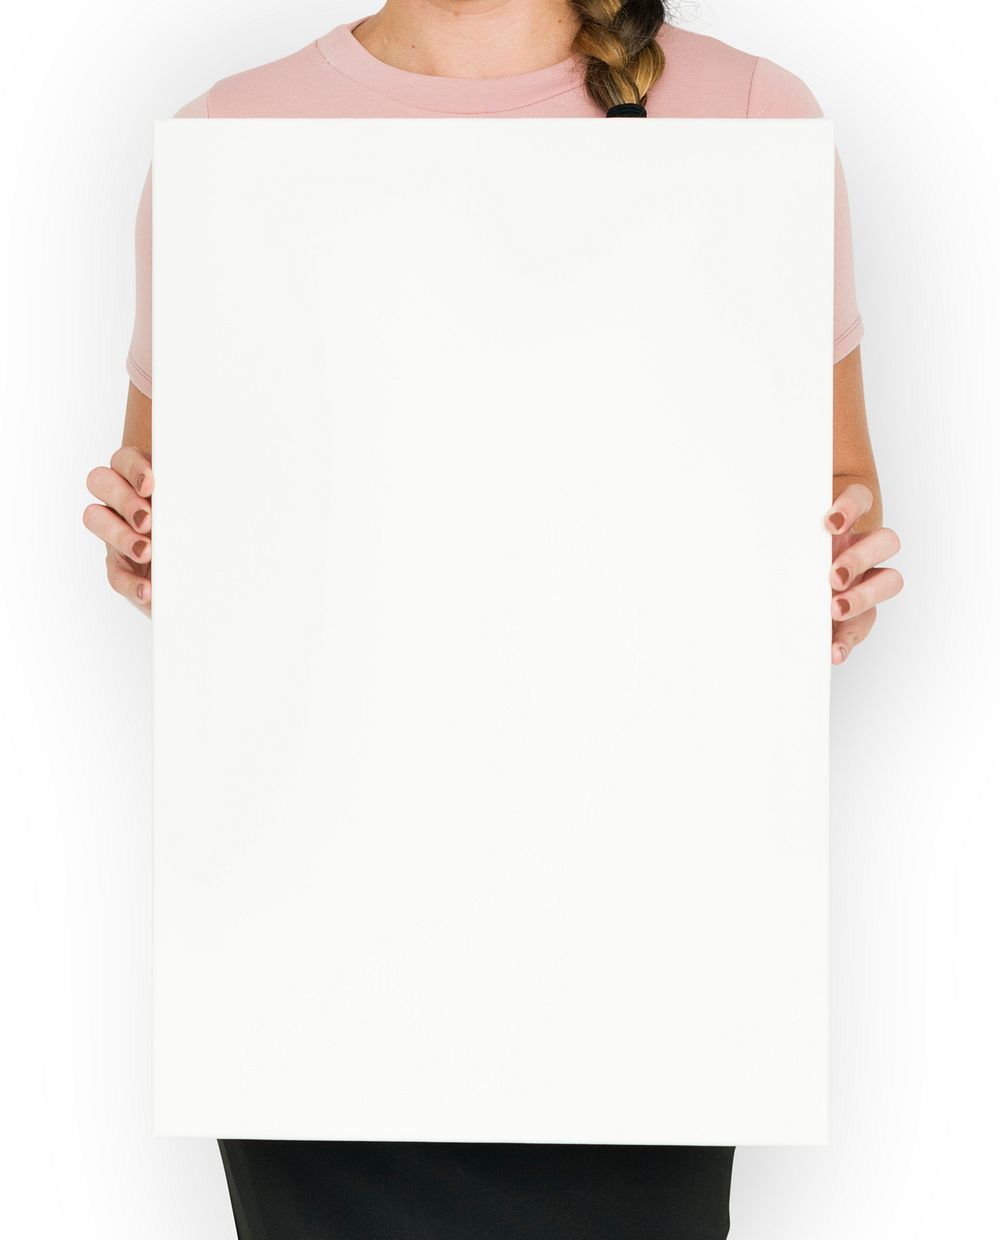 Woman Holding Blank Paper Shoot